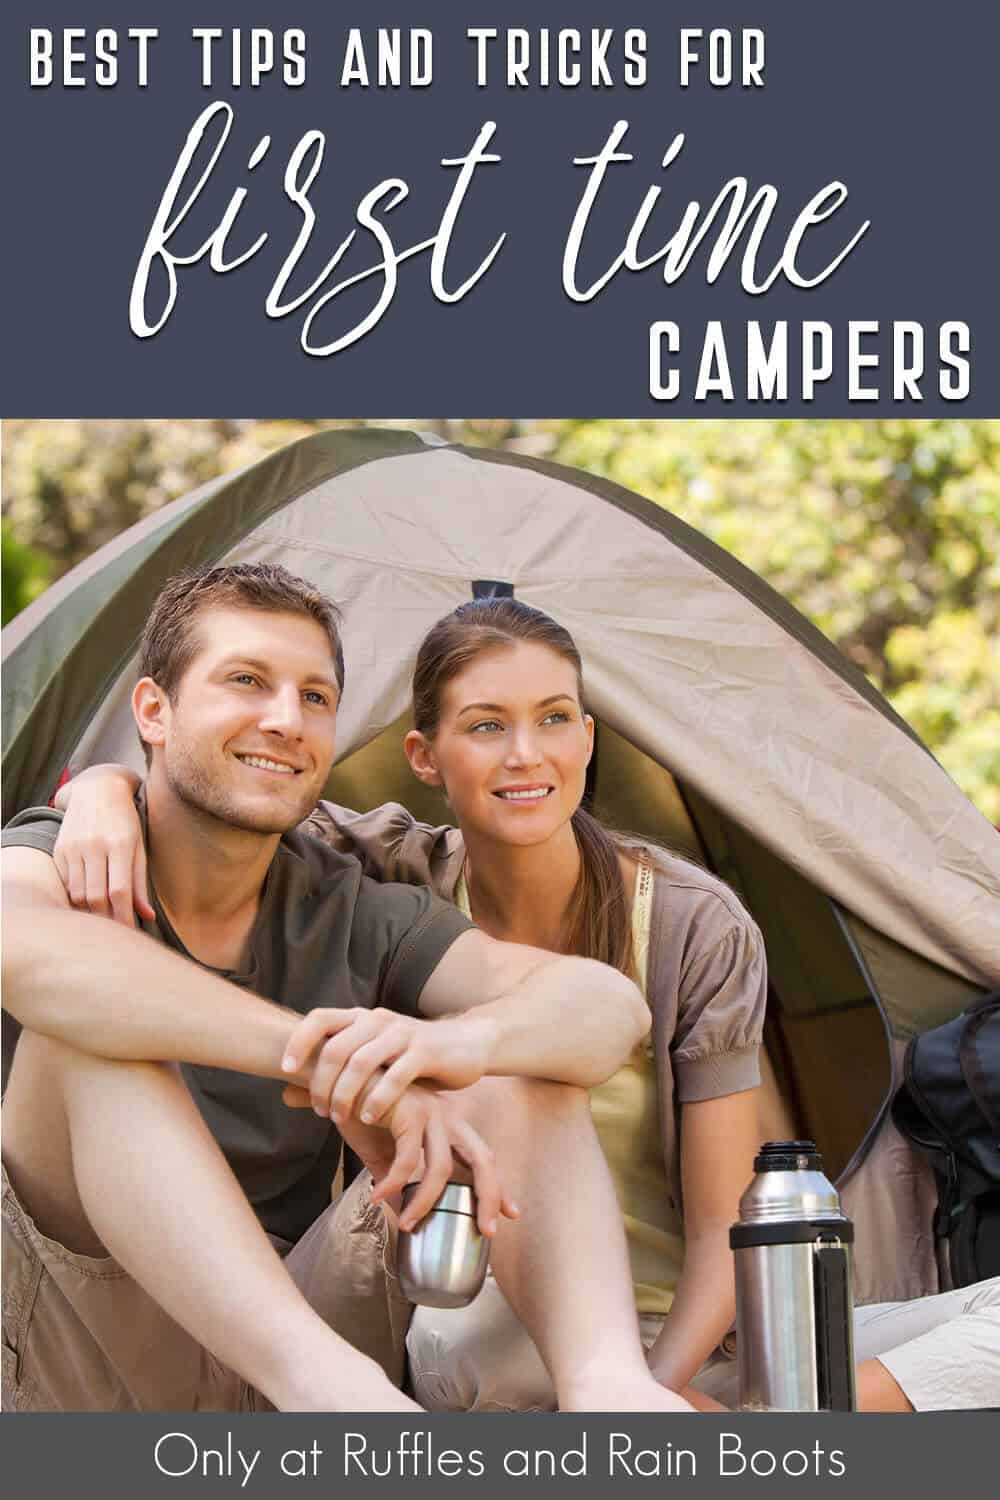 first time camping tips with text which reads best tips and tricks for first time campers